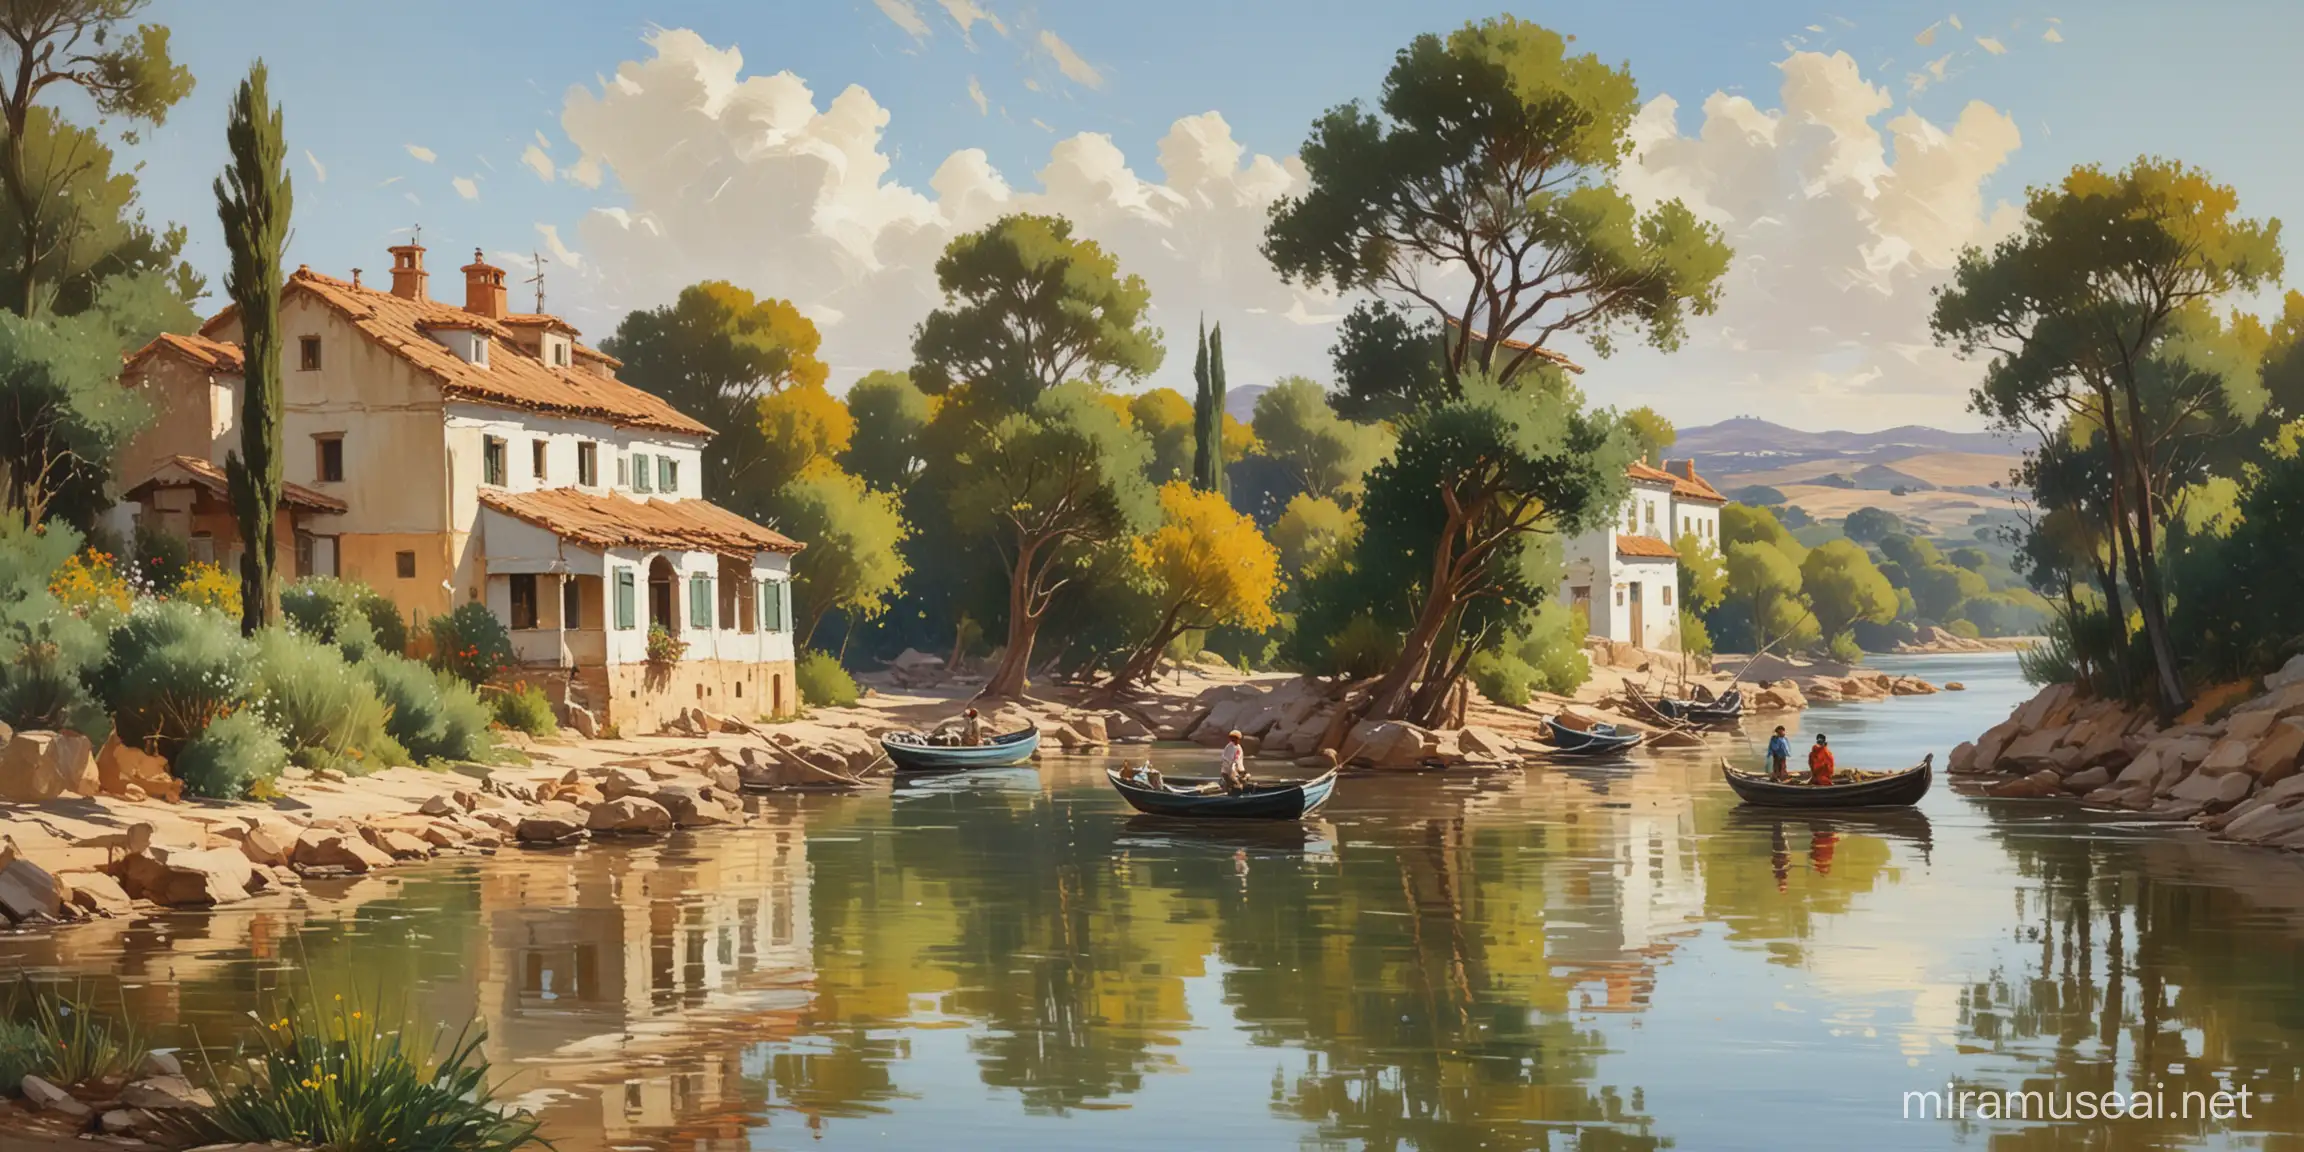 Epic Riverside Fishermans Home with Reflected Trees and Distant Sailing Ship in Sorolla Style